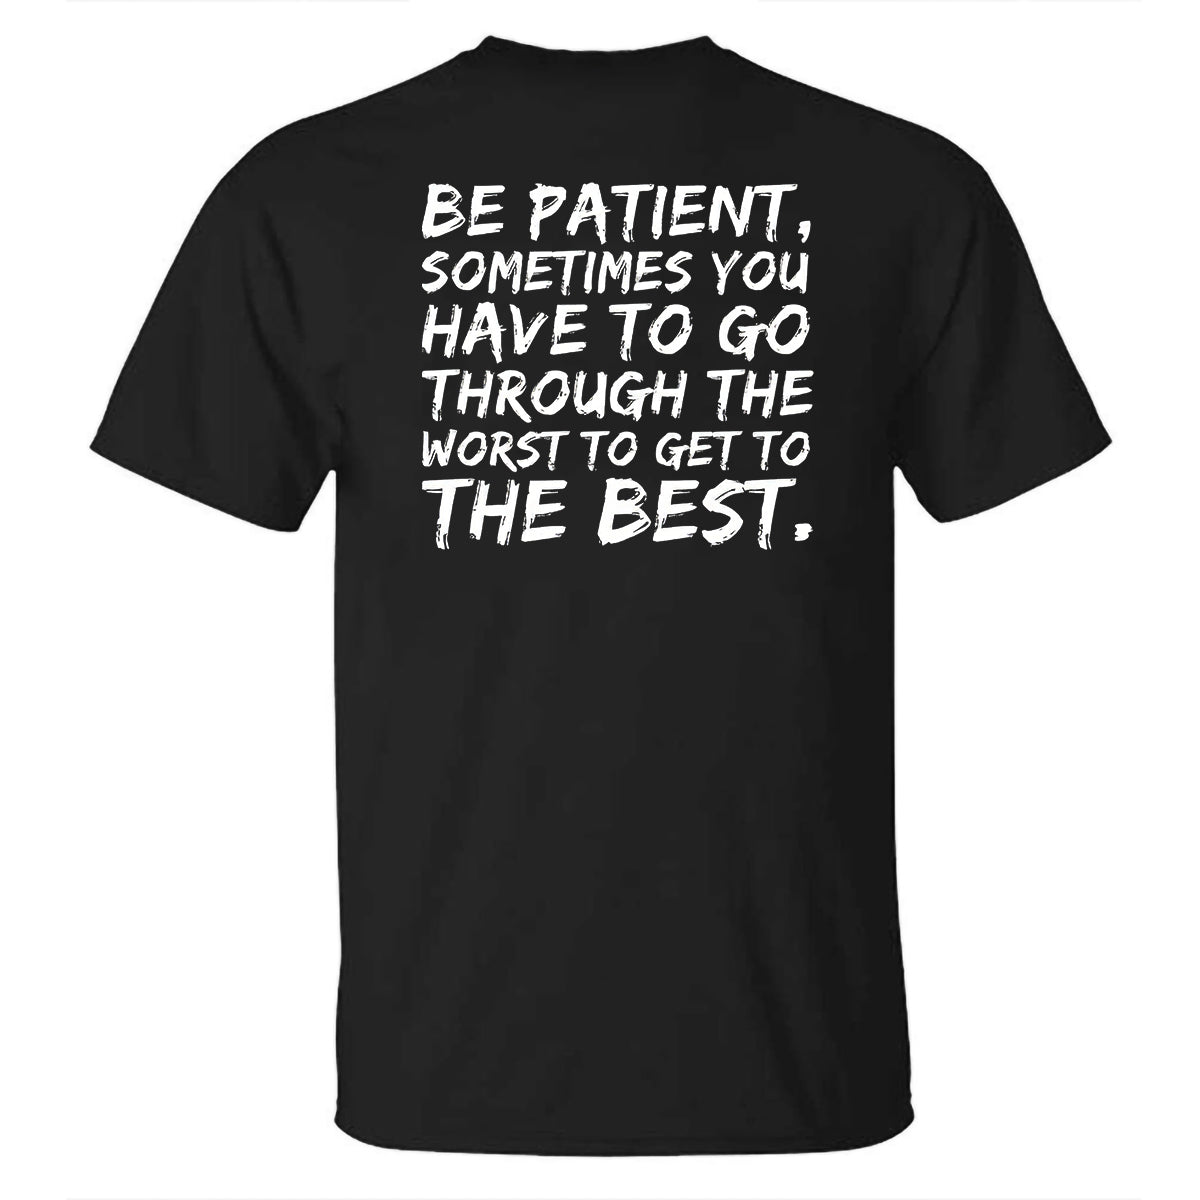 Be Patient, Sometimes You Have To Go Through The Worst To Get To The Best Printed T-shirt